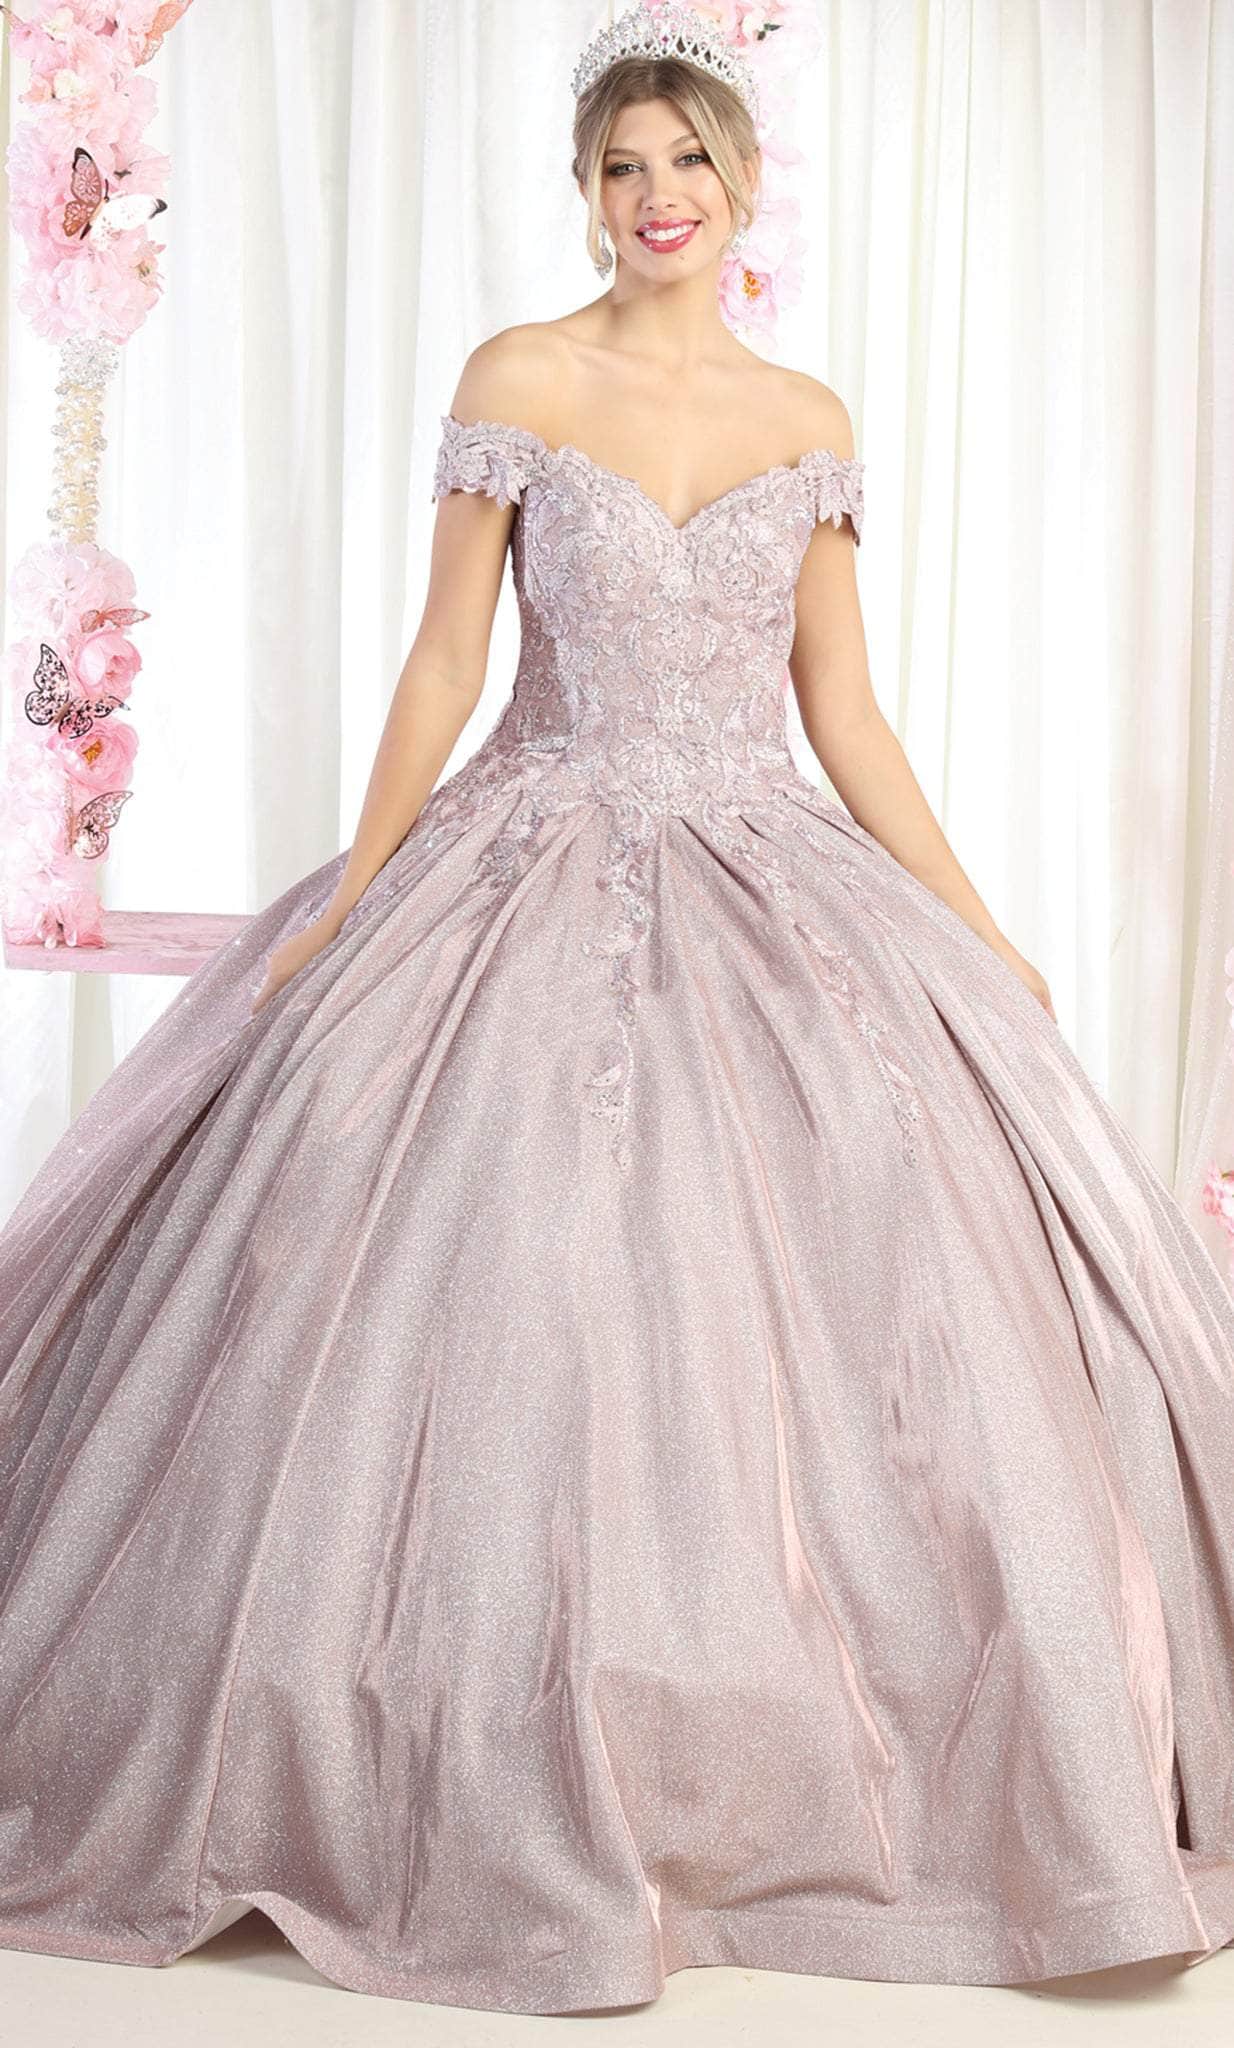 May Queen LK178 - Lace Detailed Quinceanera Ballgown Quinceanera Dresses 4 / Rose Gold